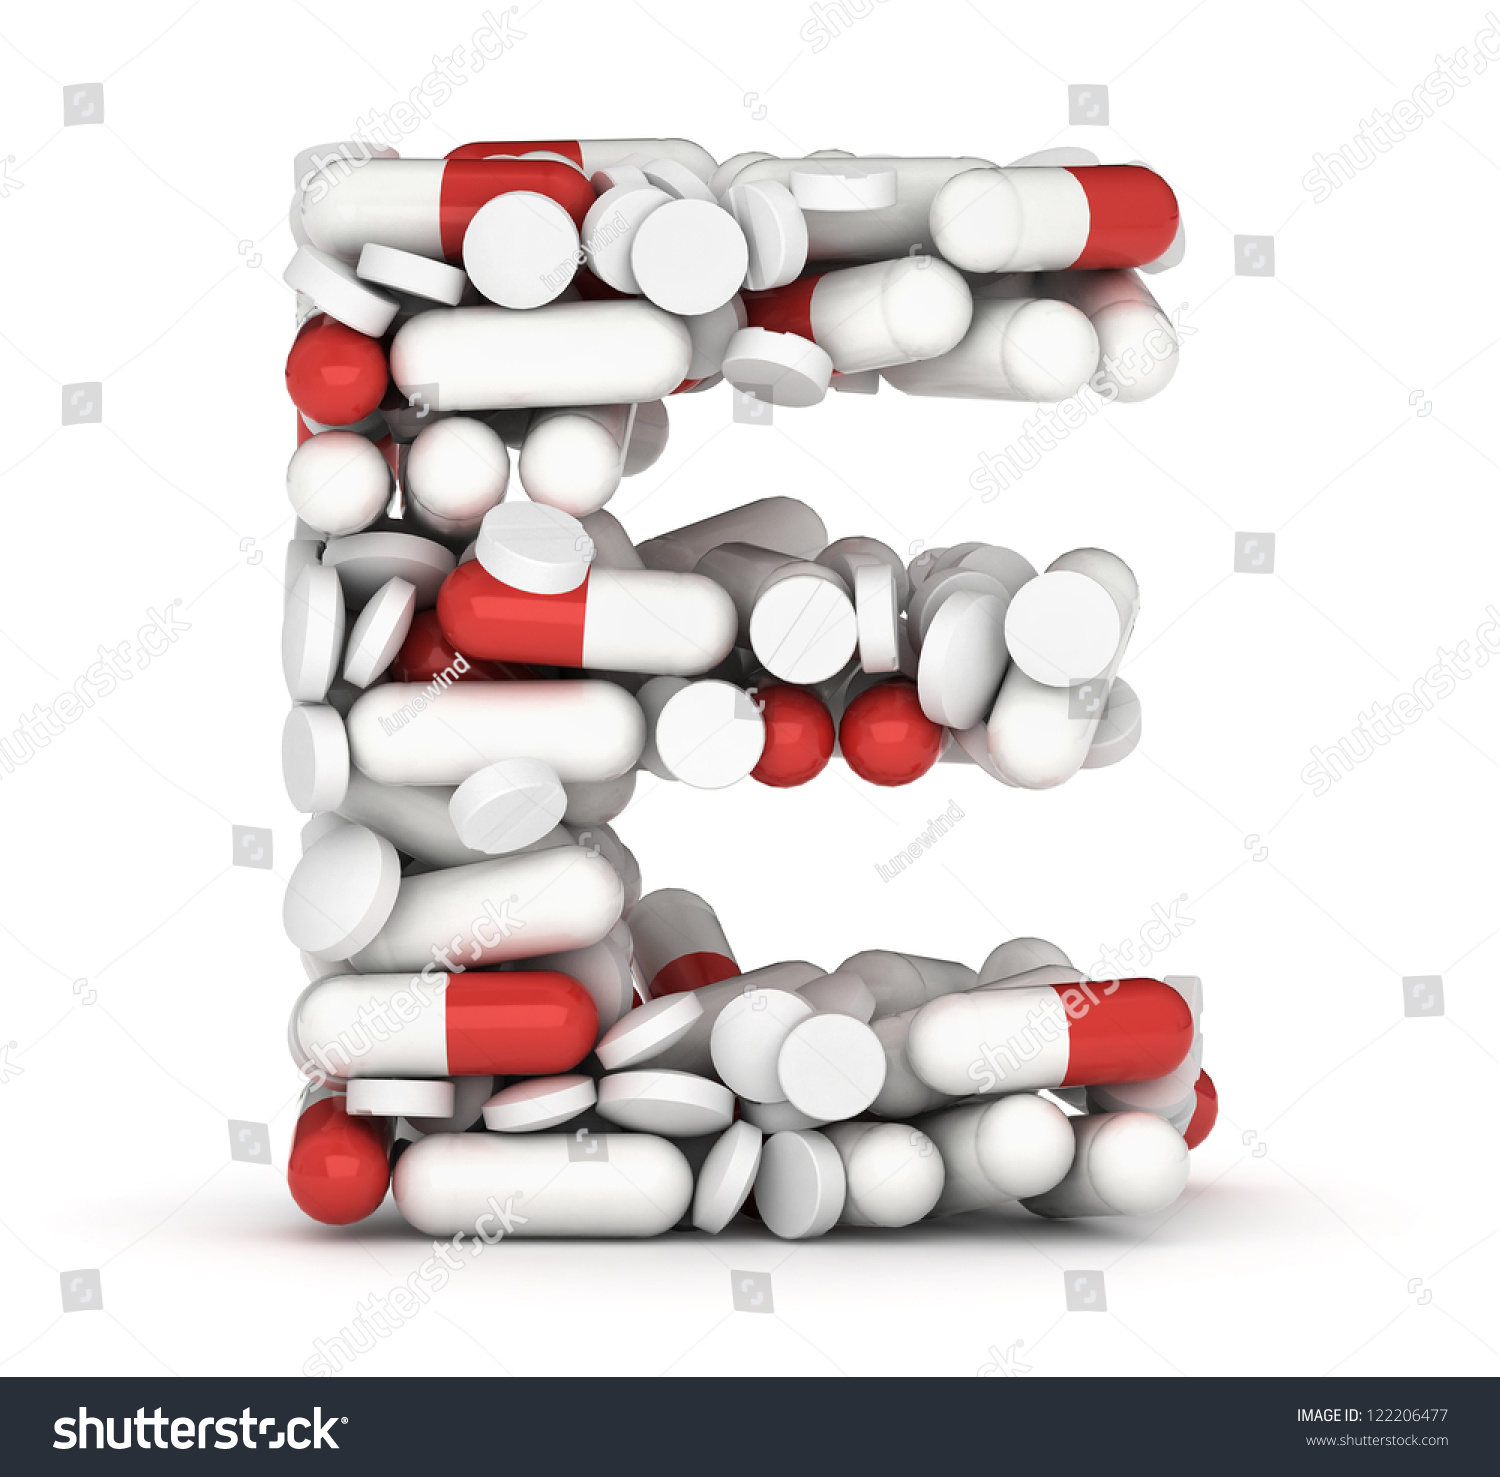 Collection 99+ Images what is a pill with the letter e on it Superb